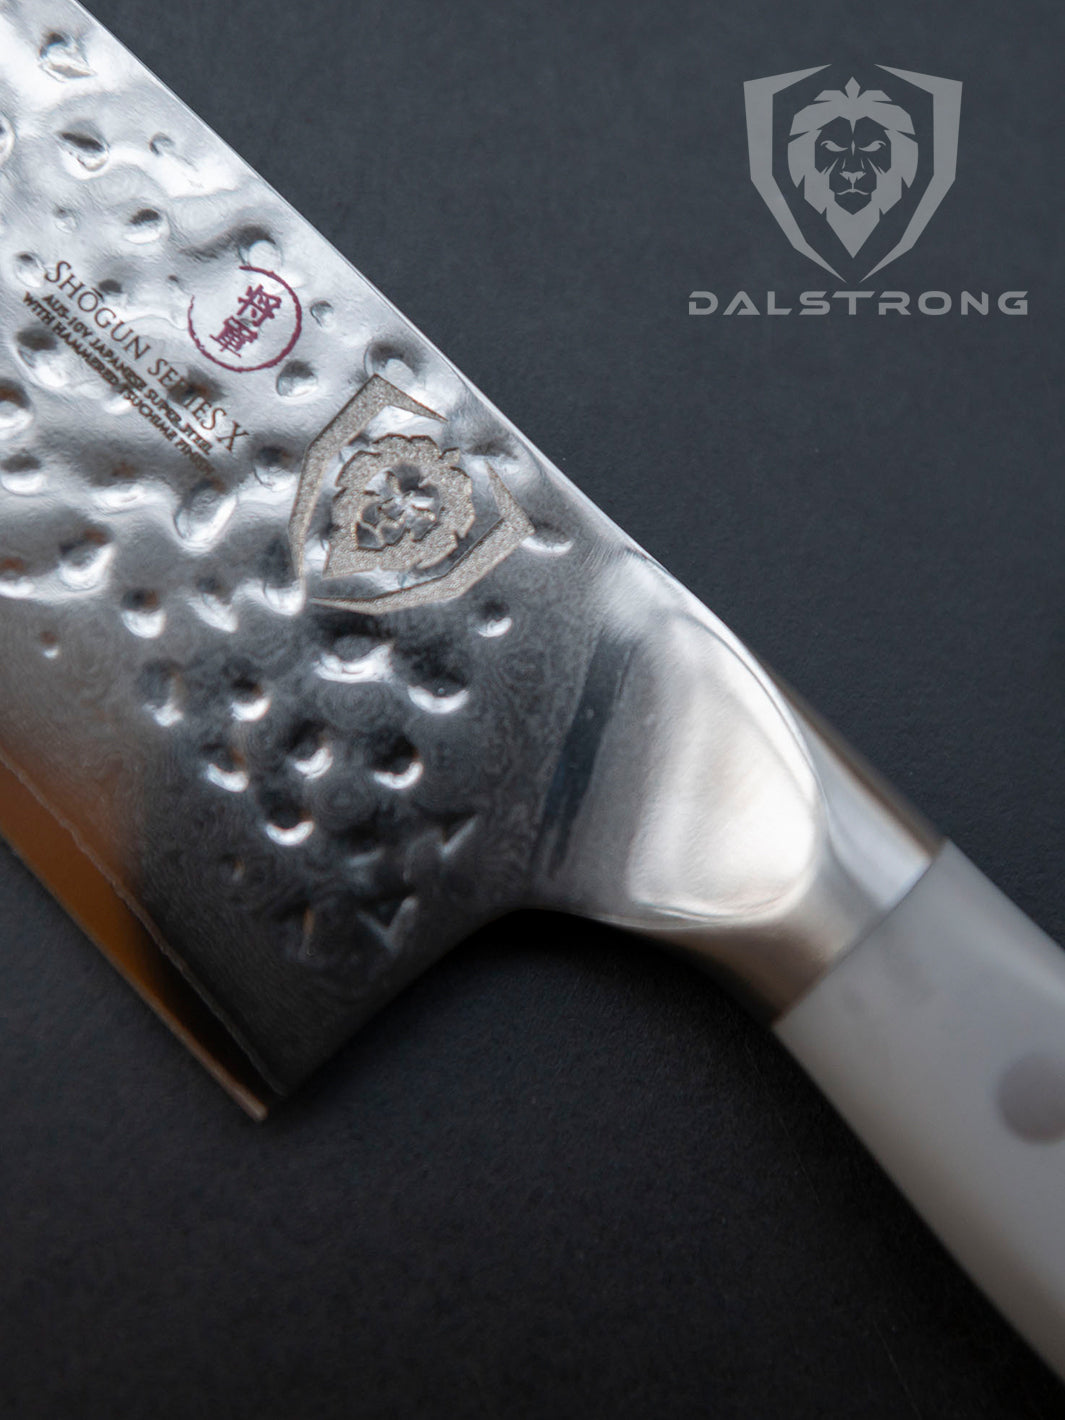 Dalstrong shogun series 8 inch chef knife with gray matte handle and logo of Dalstrong on a solid surface.